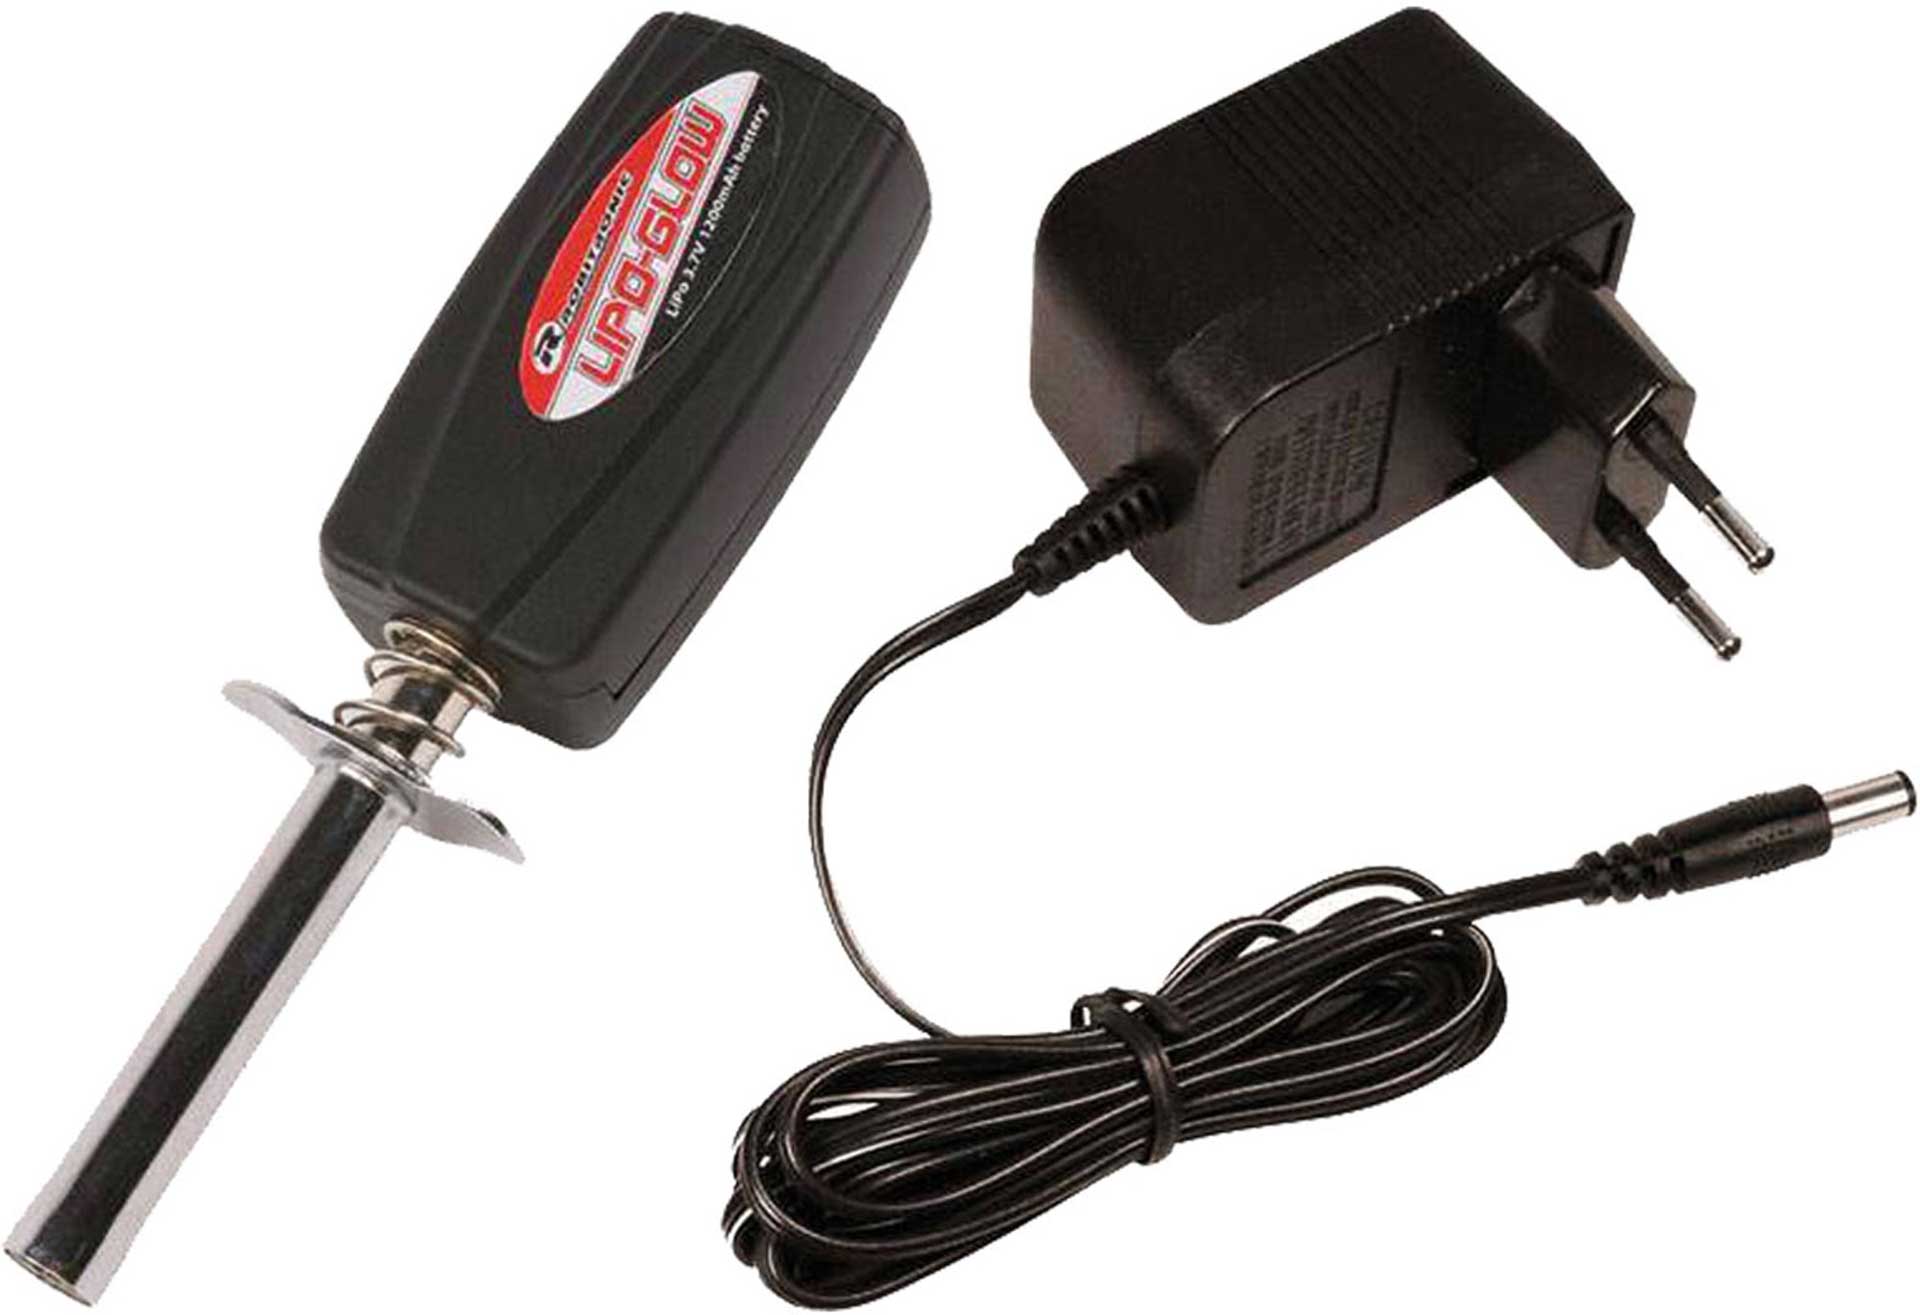 ROBITRONIC LIPO GLOW PLUG STARTER  WITH CHARGING DEVICE